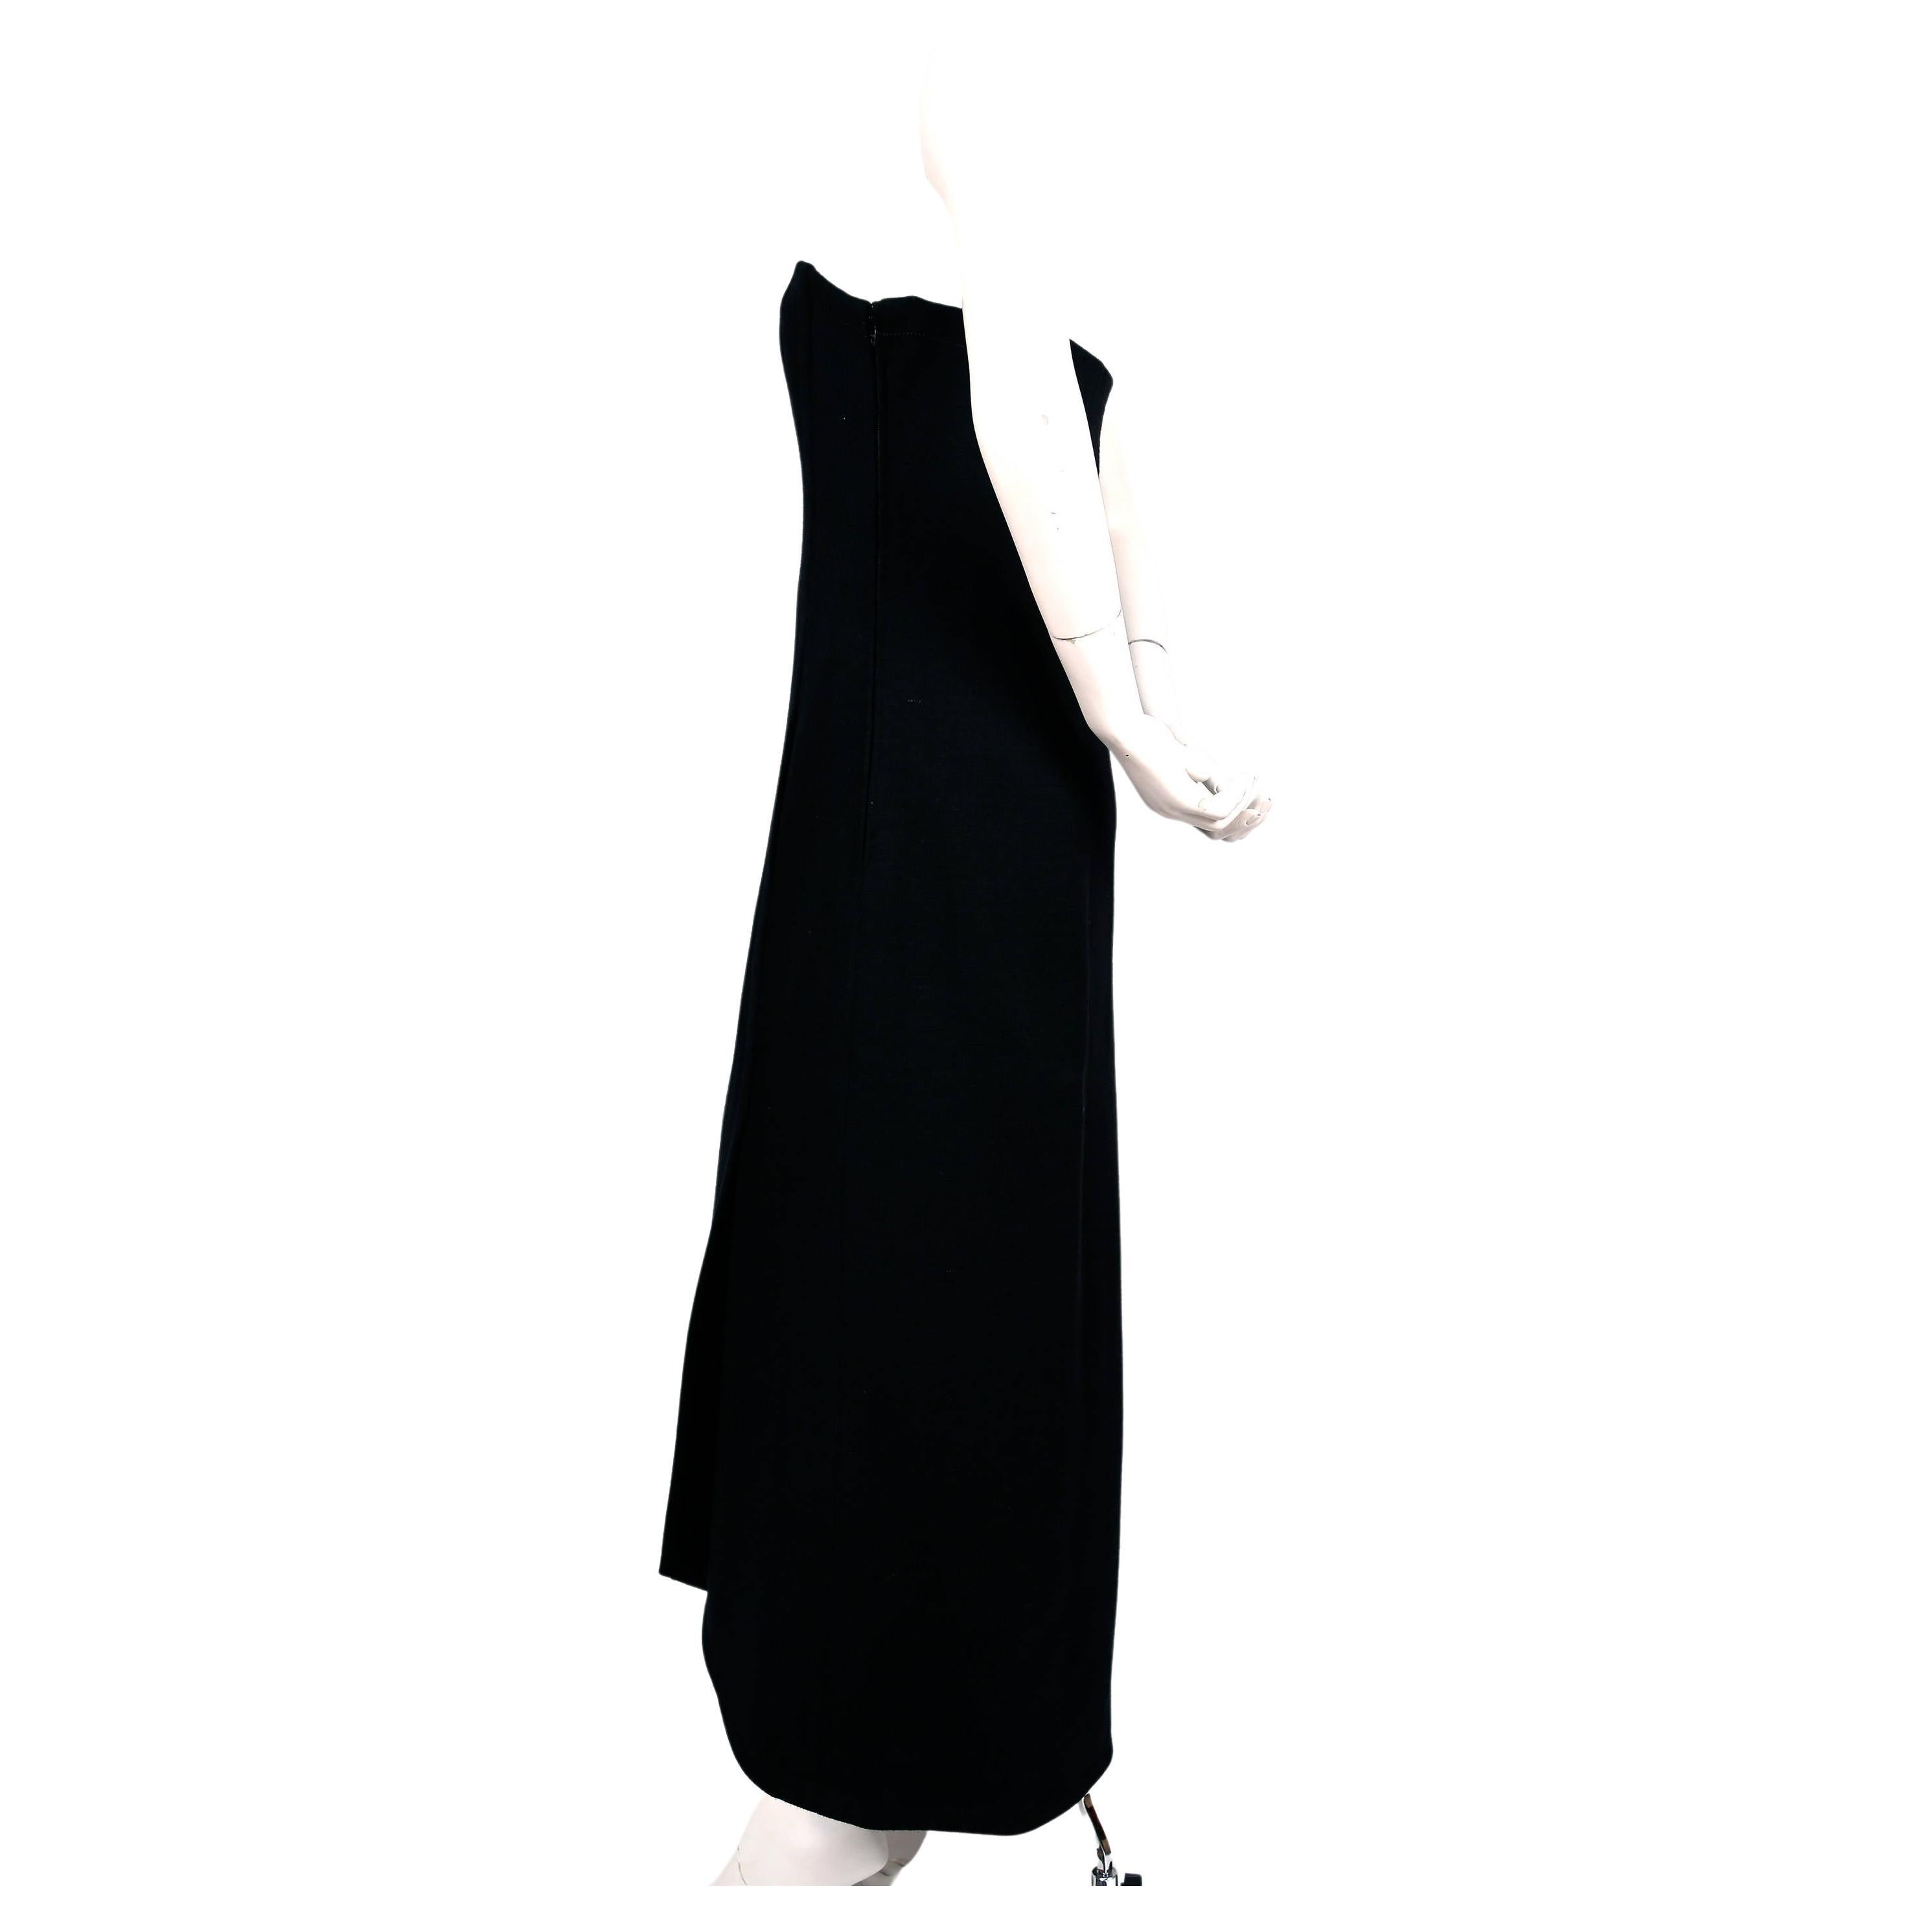 Very chic, jet-black, wool jersey strapless dress with internal corset and silk lining from James Galanos dating to the 1960's. Dress has very unique asymmetrical seaming and hemline. Also has a secret slash pocket hidden by seam at front. Fits